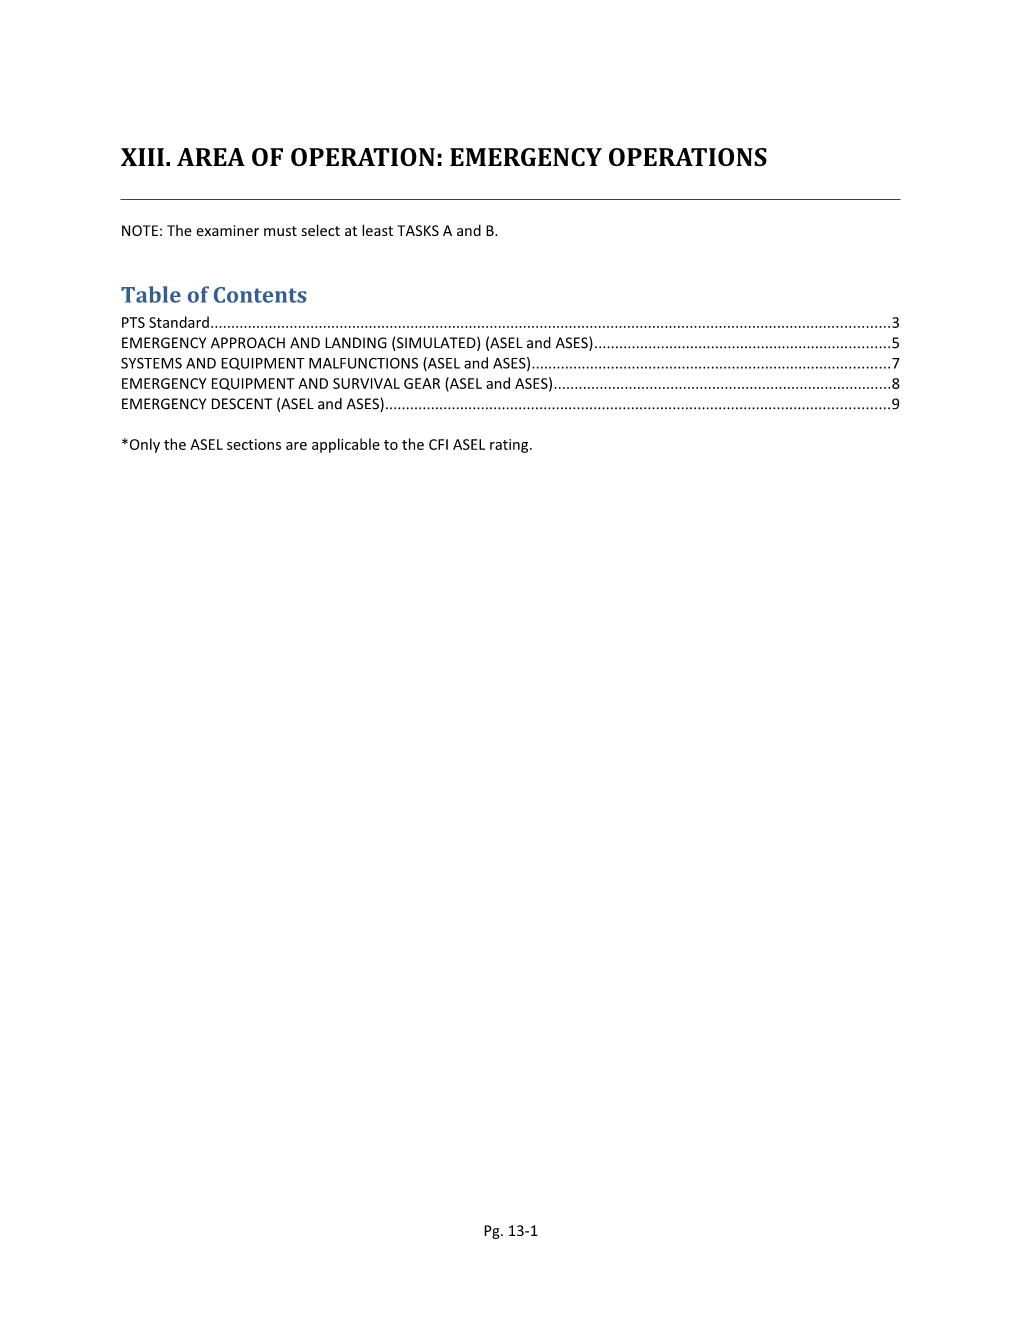 Xiii. Area of Operation: Emergency Operations